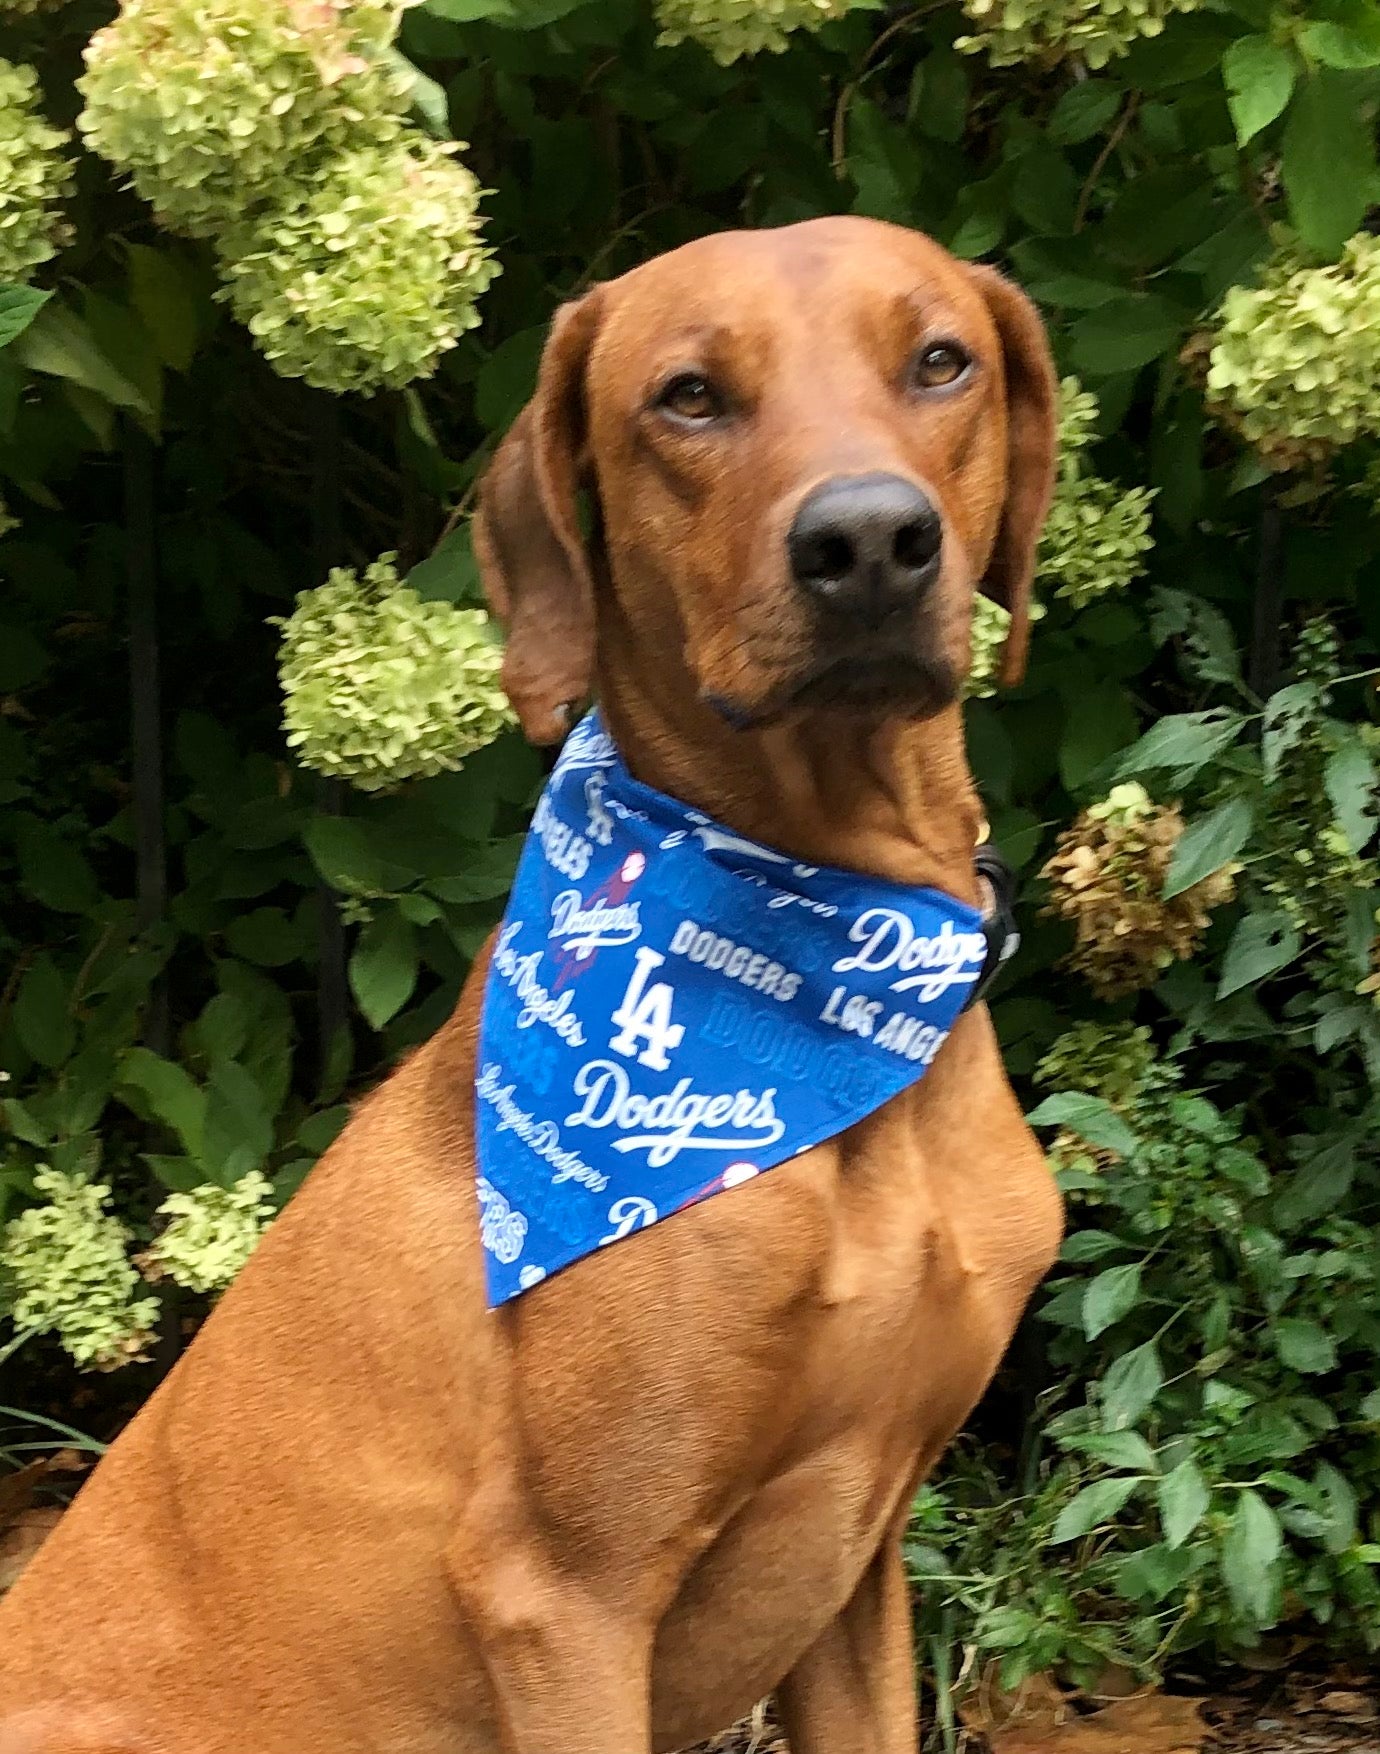  Pets First MLB Los Angeles Dodgers TIE Bandana, Large